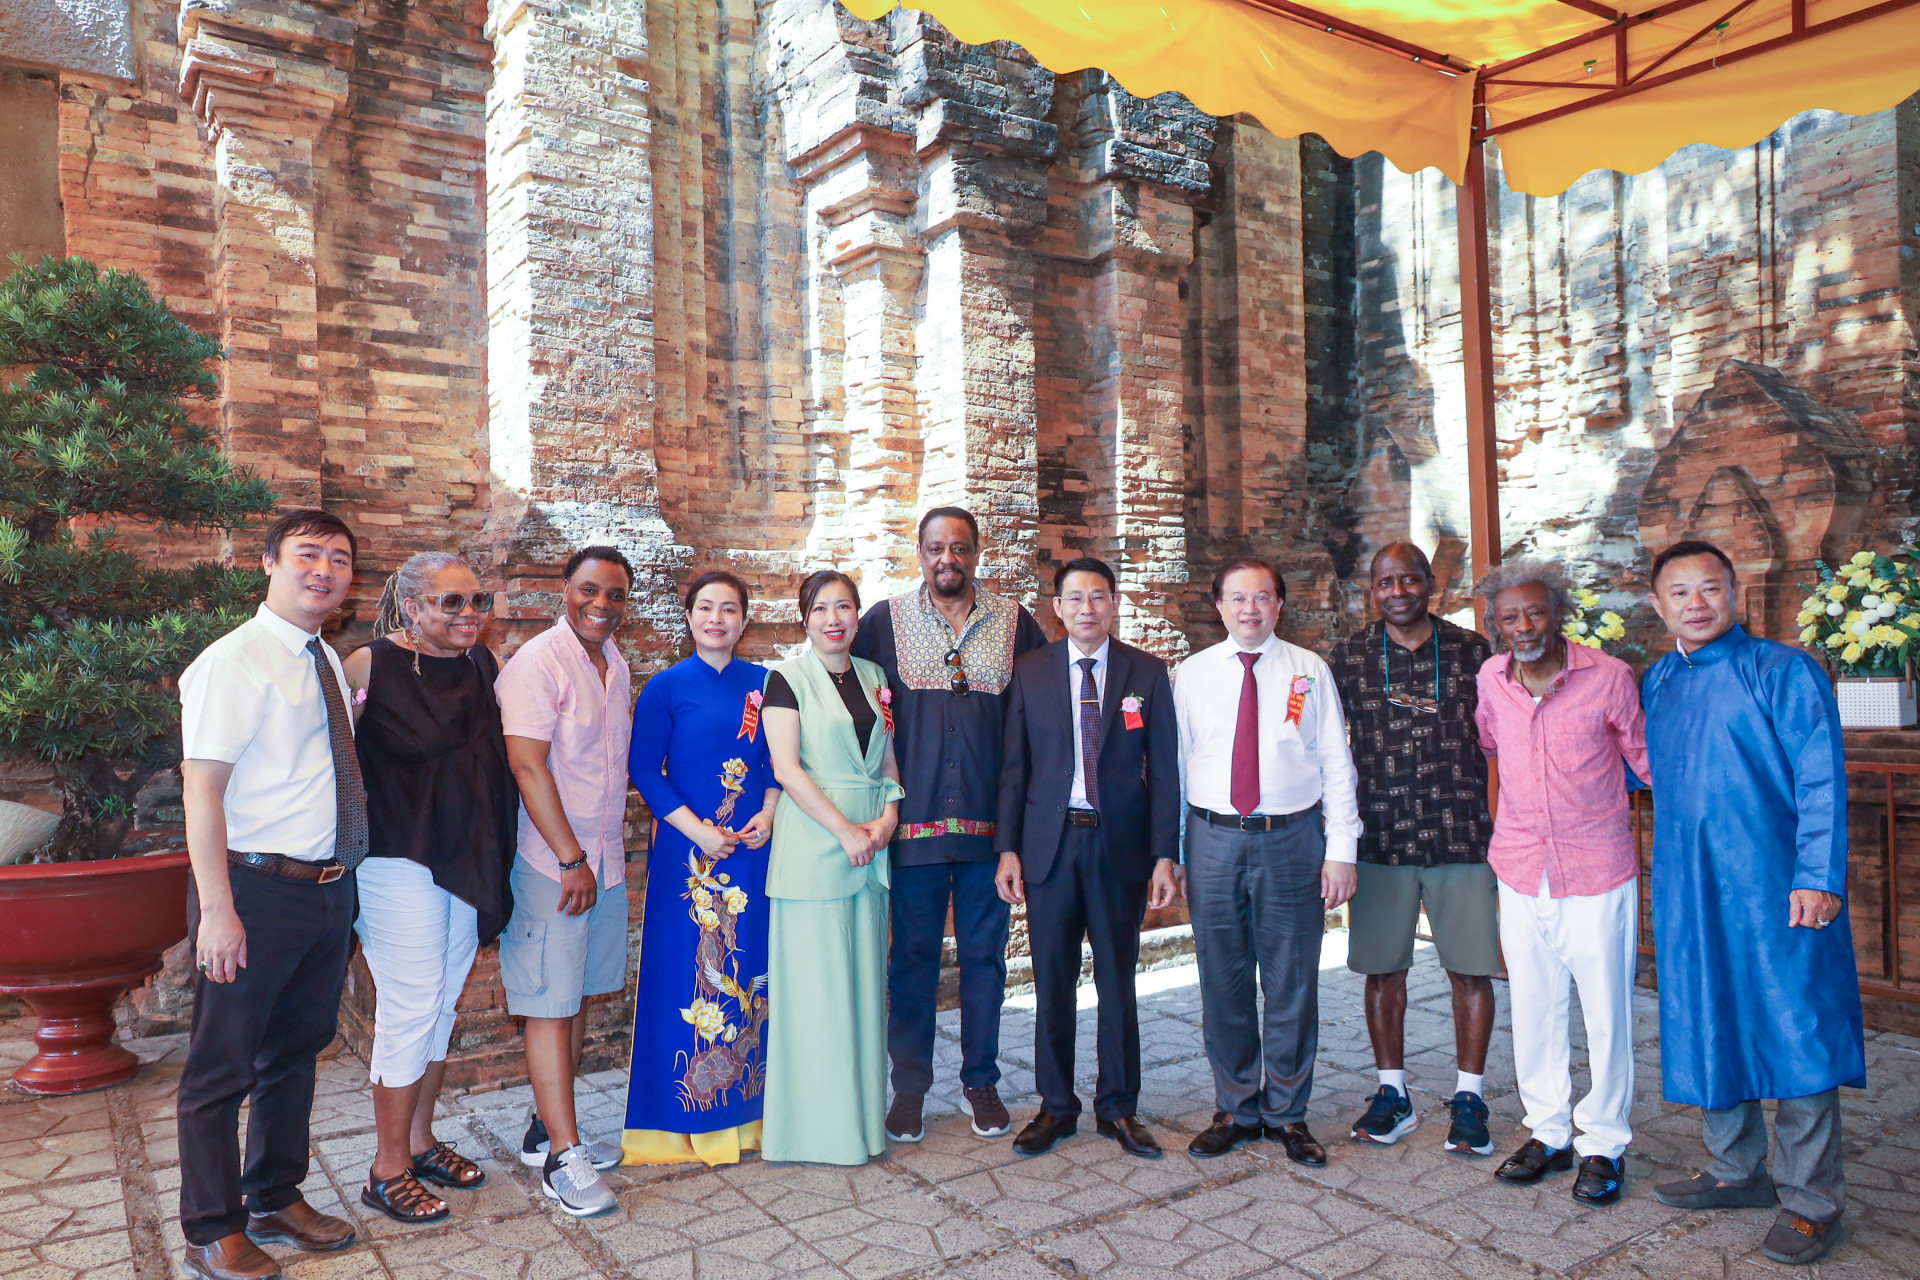 Jazz legend Chico Freeman and the band members from the US posing for photo with the leaders of the Ministry of Culture, Sports and Tourism, the Ministry of Foreign Affairs and Khanh Hoa Province at Ponagar Temple

